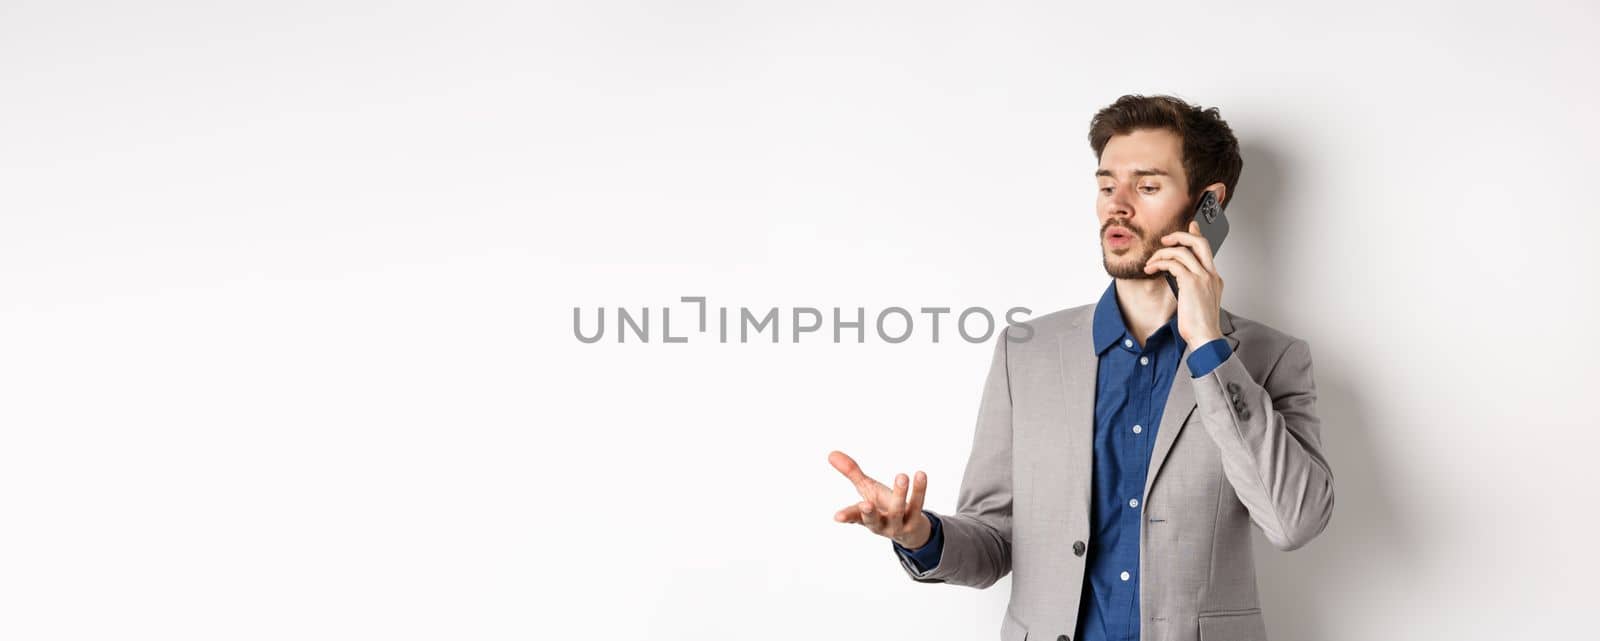 Handsome businessman having business call on phone, gesturing while talking on mobile, having conversation, white background.